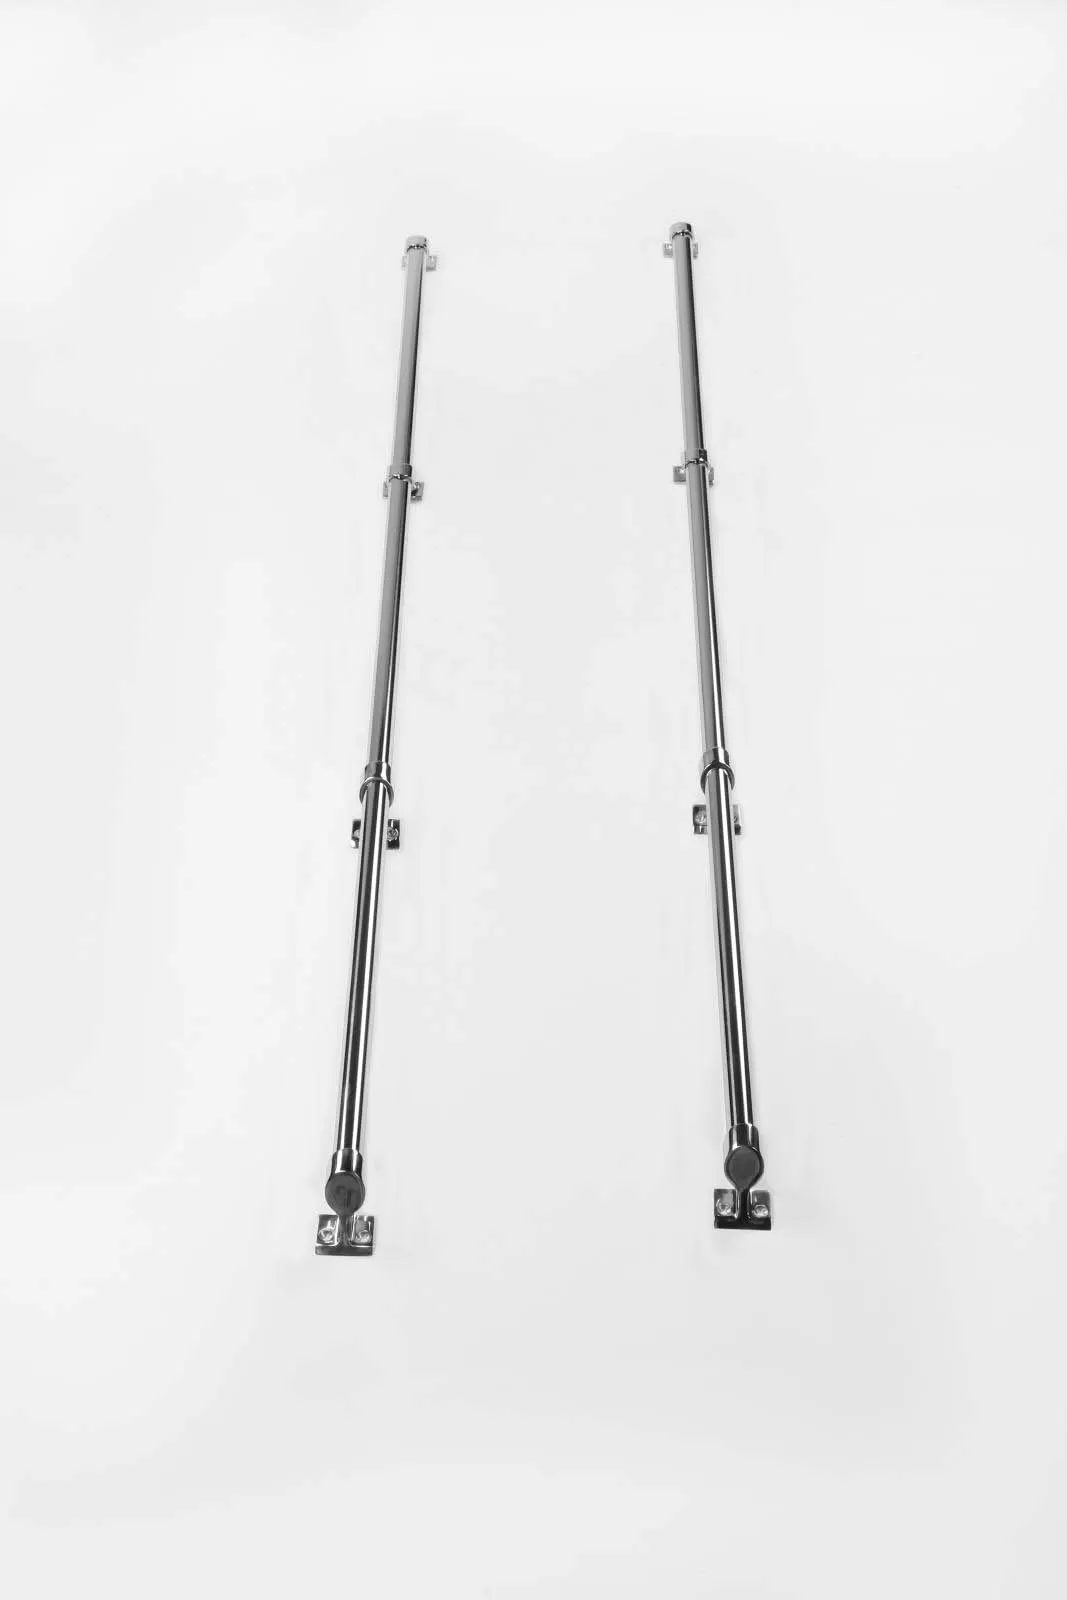 Perrycraft Mini Tube Truck Bed Rail Set 88 Inch Impact Stainless Steel MTR - MR-I88-S